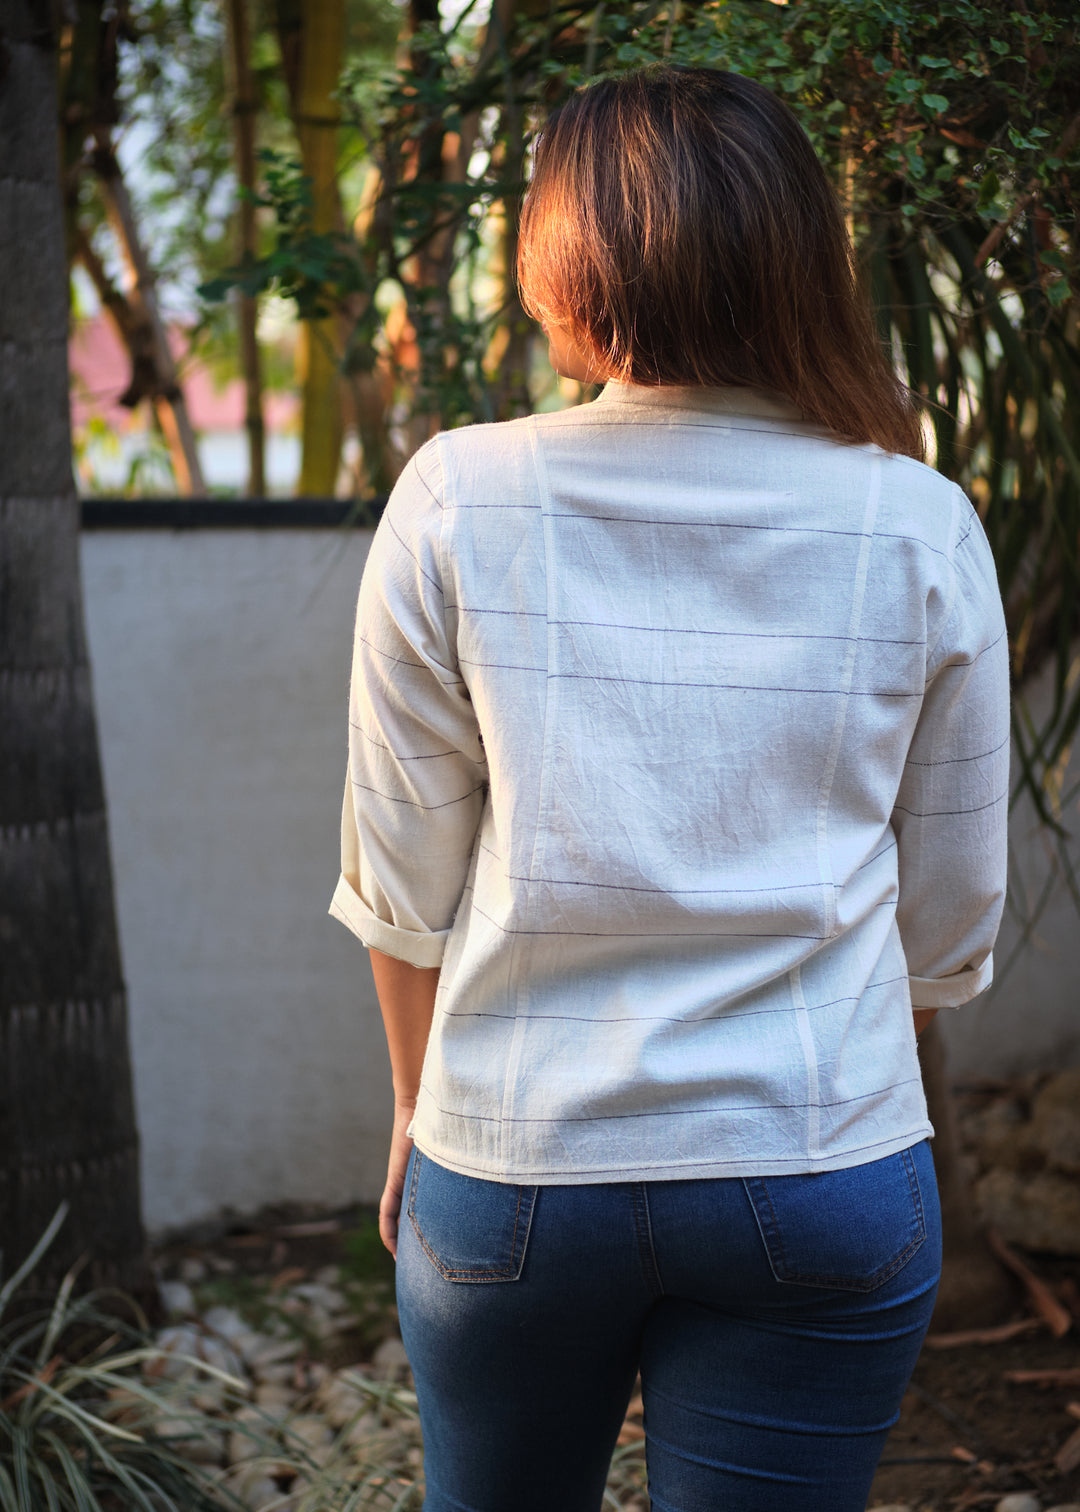 rear profile of a woman in a white shirt